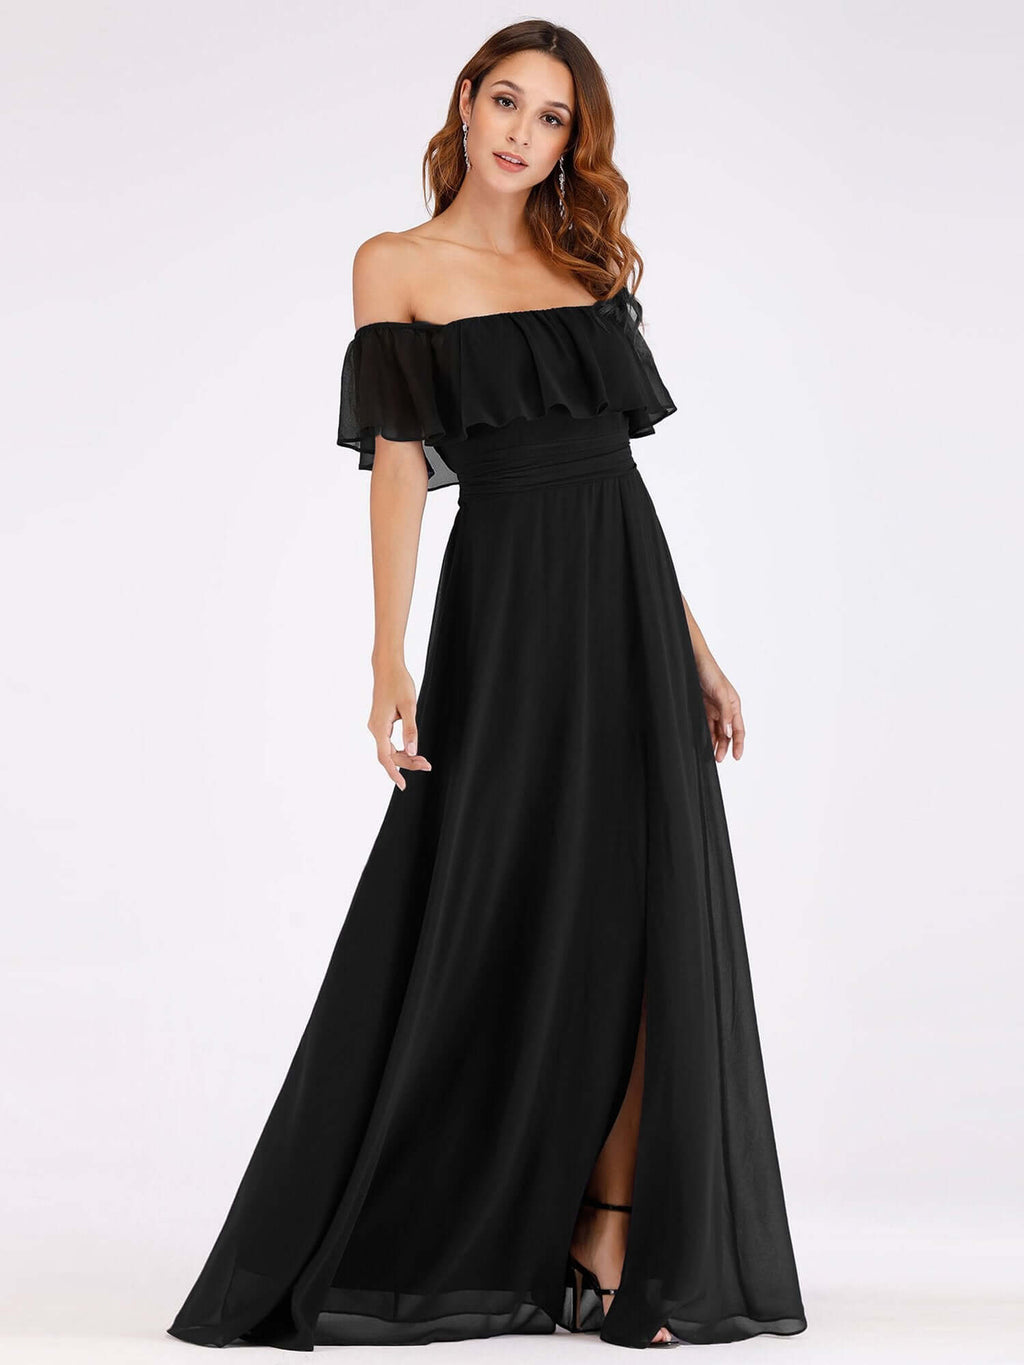 Angelina off shoulder dress with split in black s22 Express NZ wide! - Bay Bridal and Ball Gowns